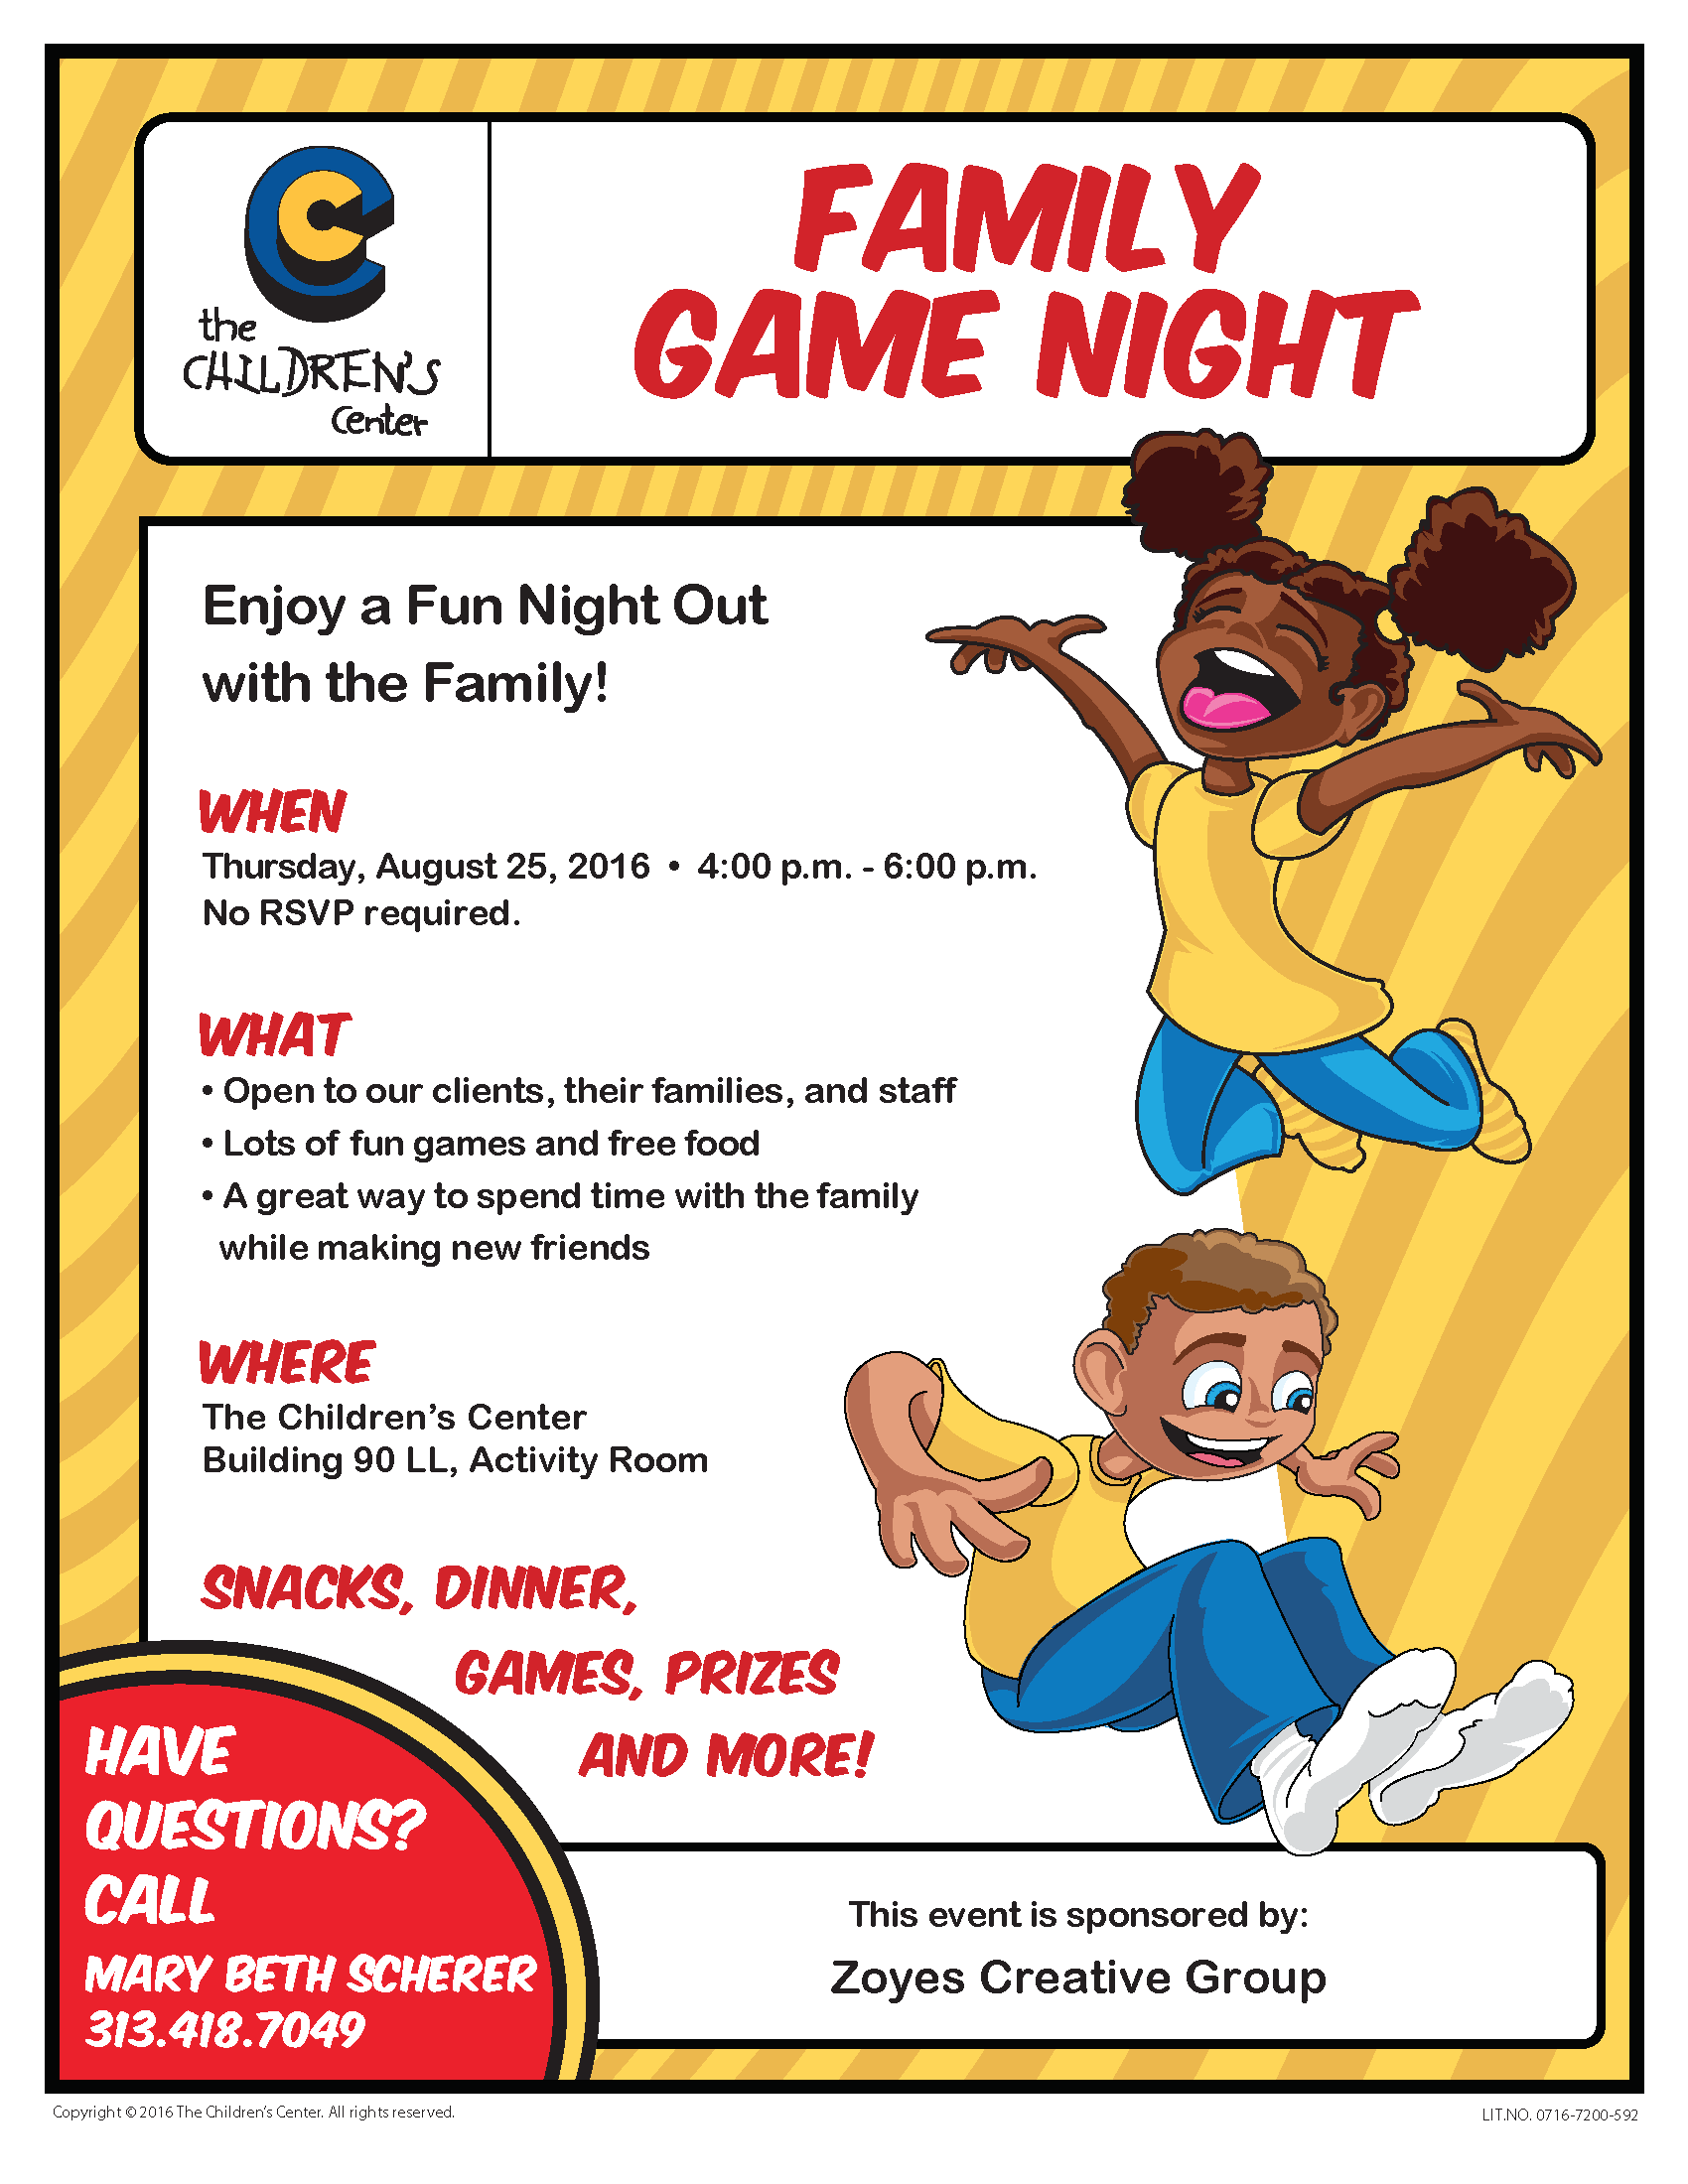 Family Game Night_Flyer_0716-7200-592